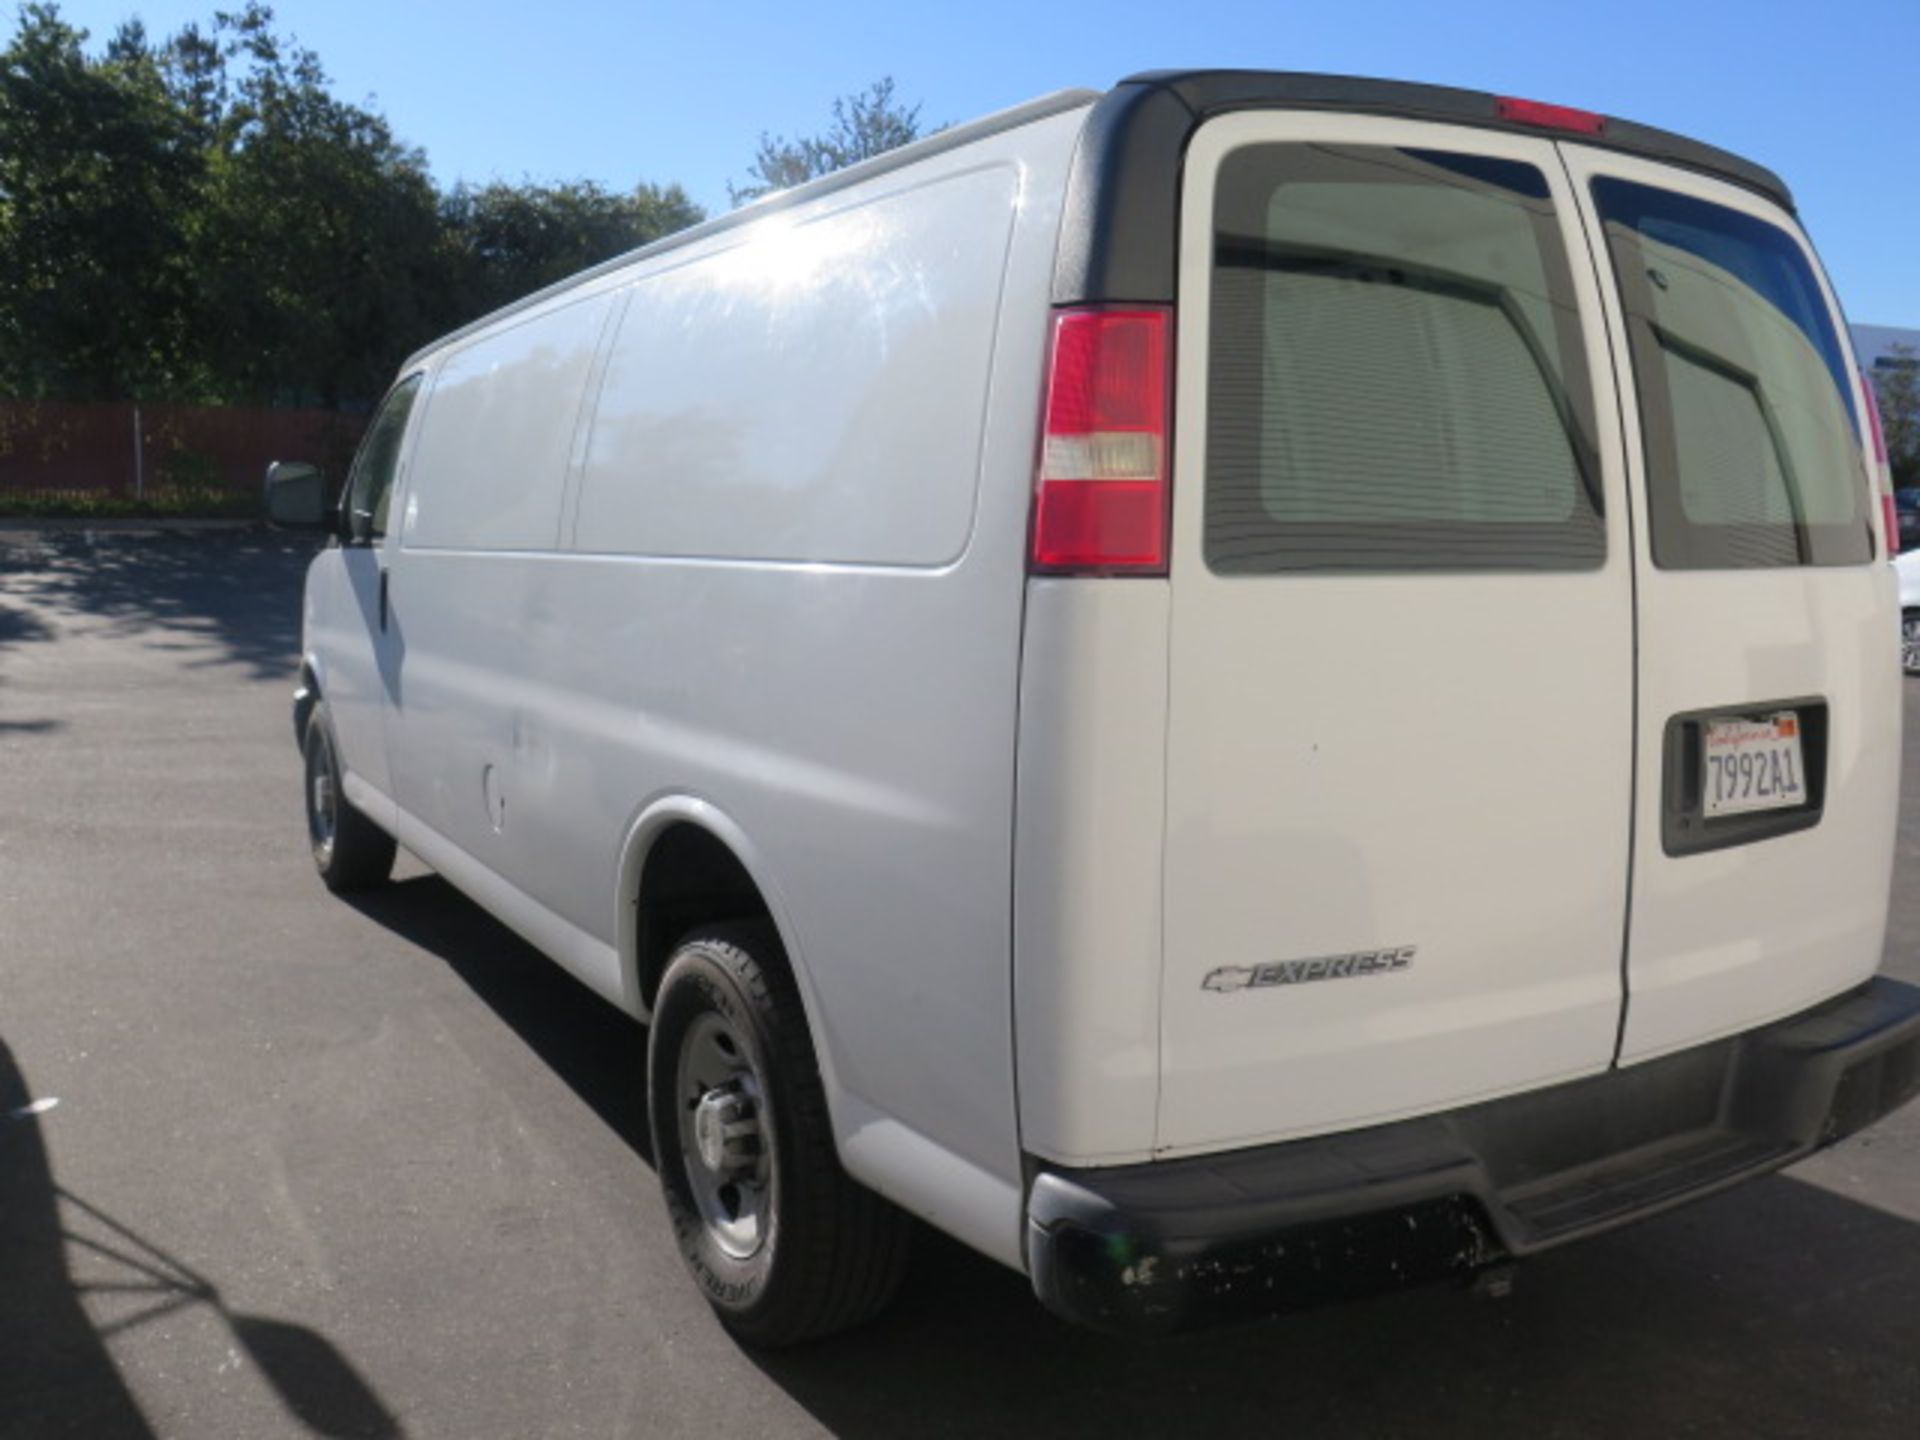 2007 Chevrolet Cargo Van Lisc #97992A1 w/Gas Engine, Auto Trans, AC, 271,713 Miles, SOLD AS IS - Image 8 of 24